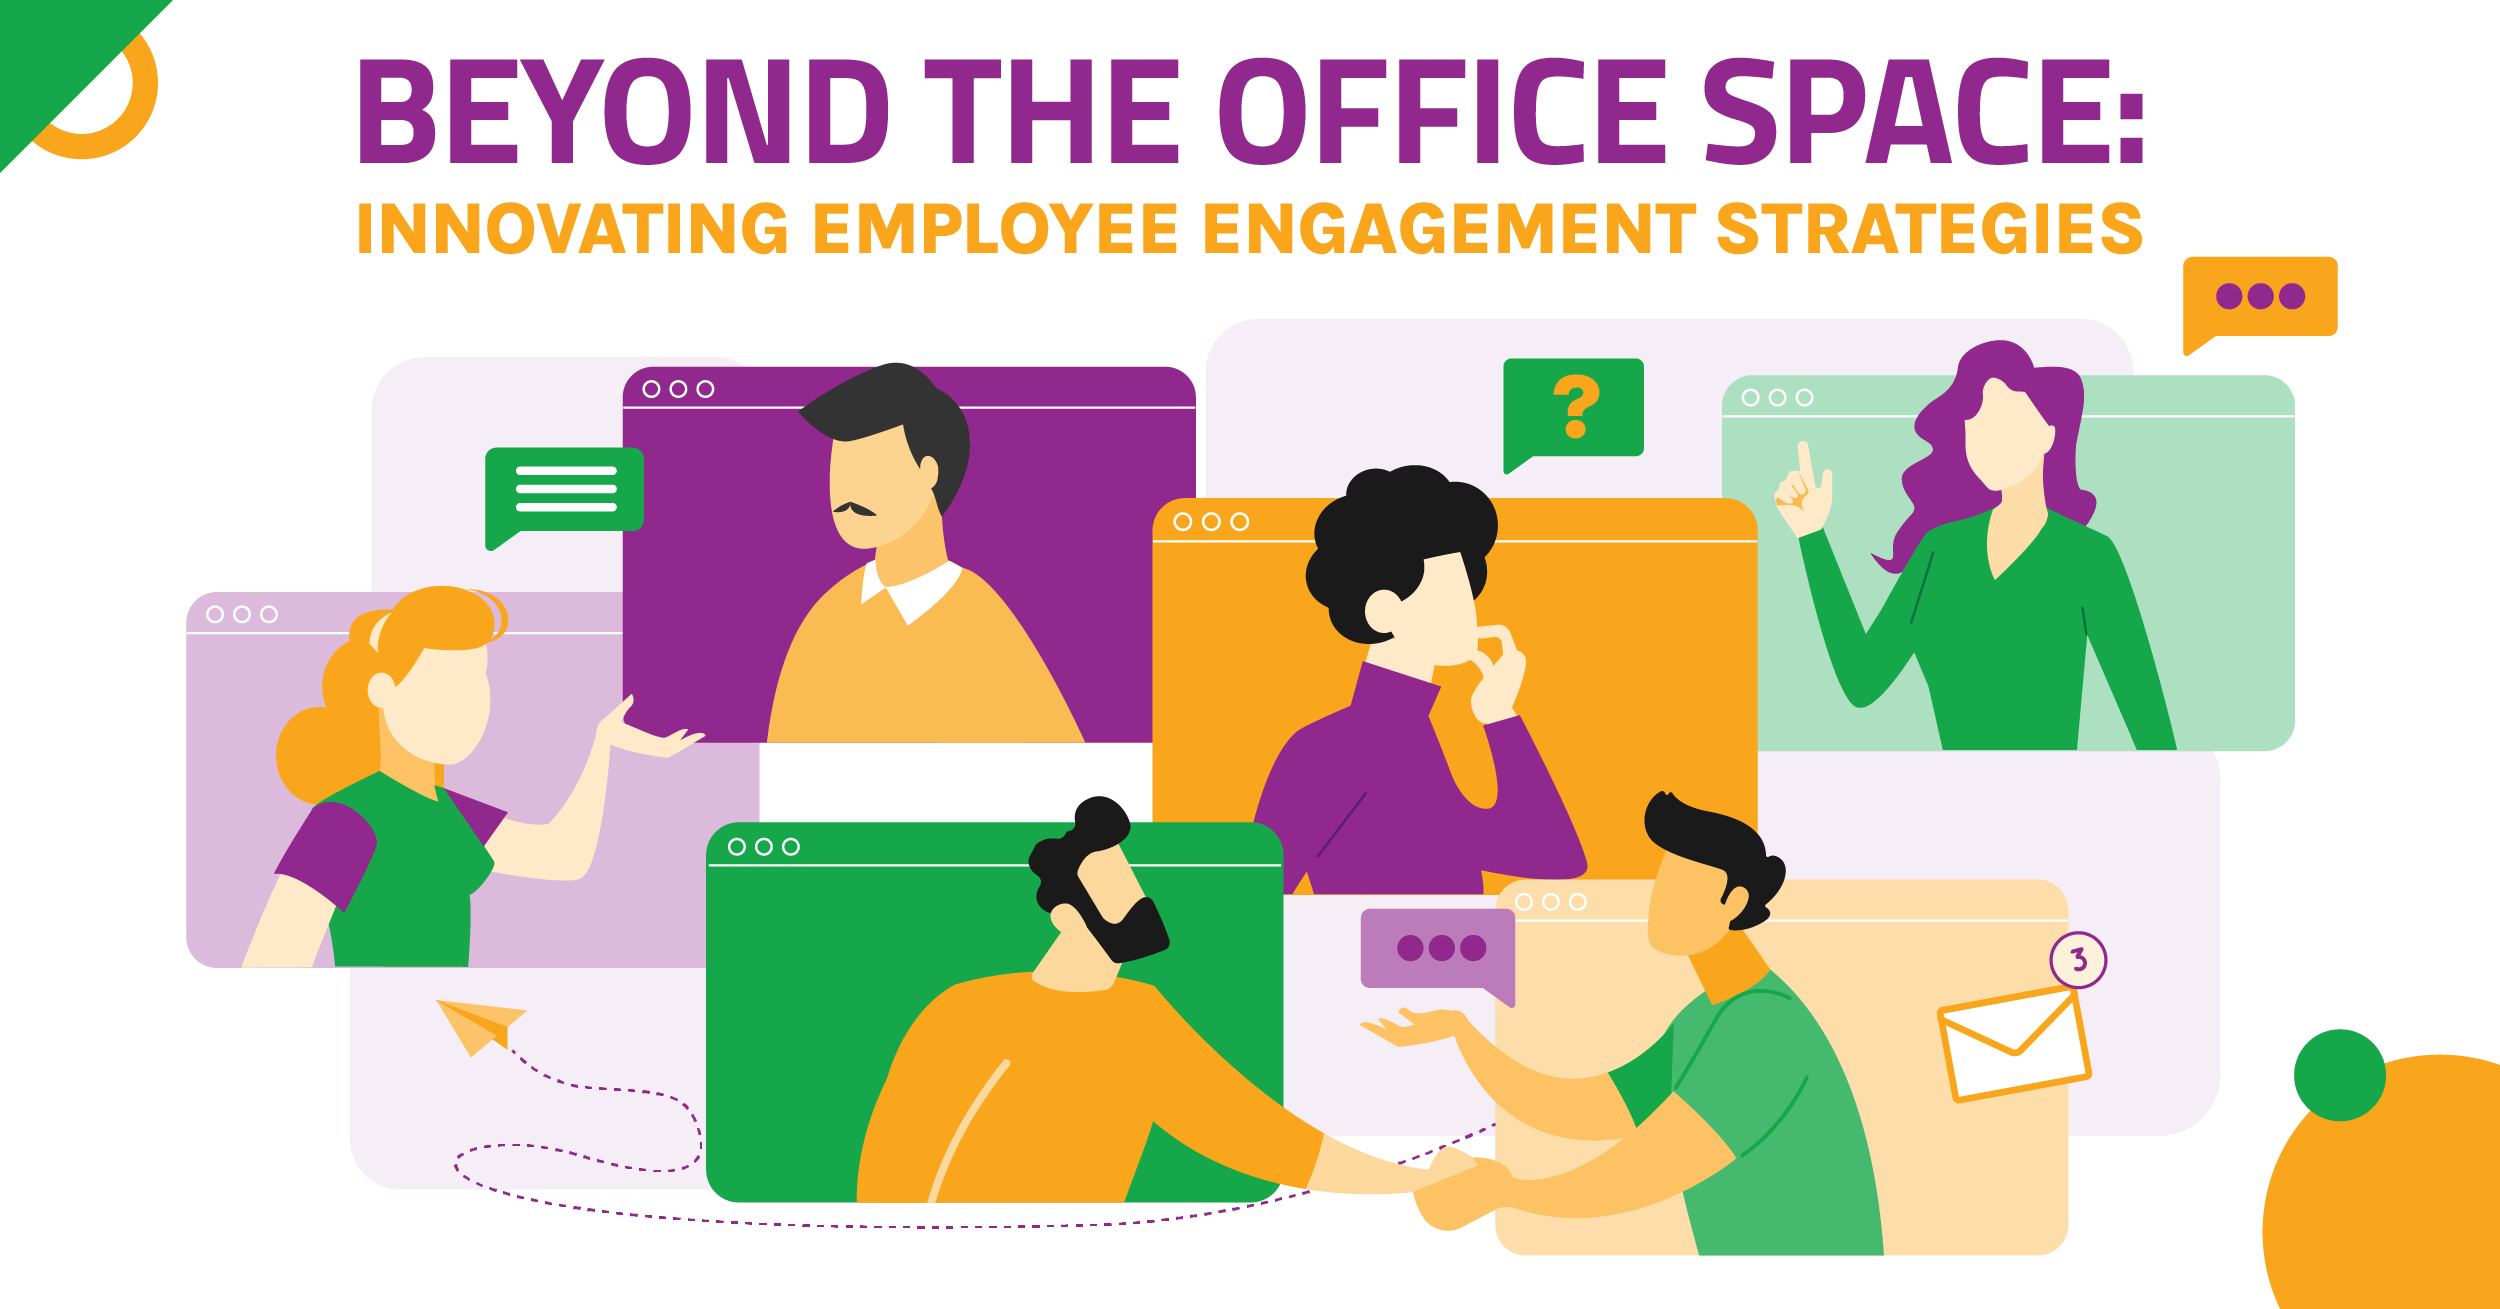 Beyond the Office Space: Innovating Employee Engagement Strategies